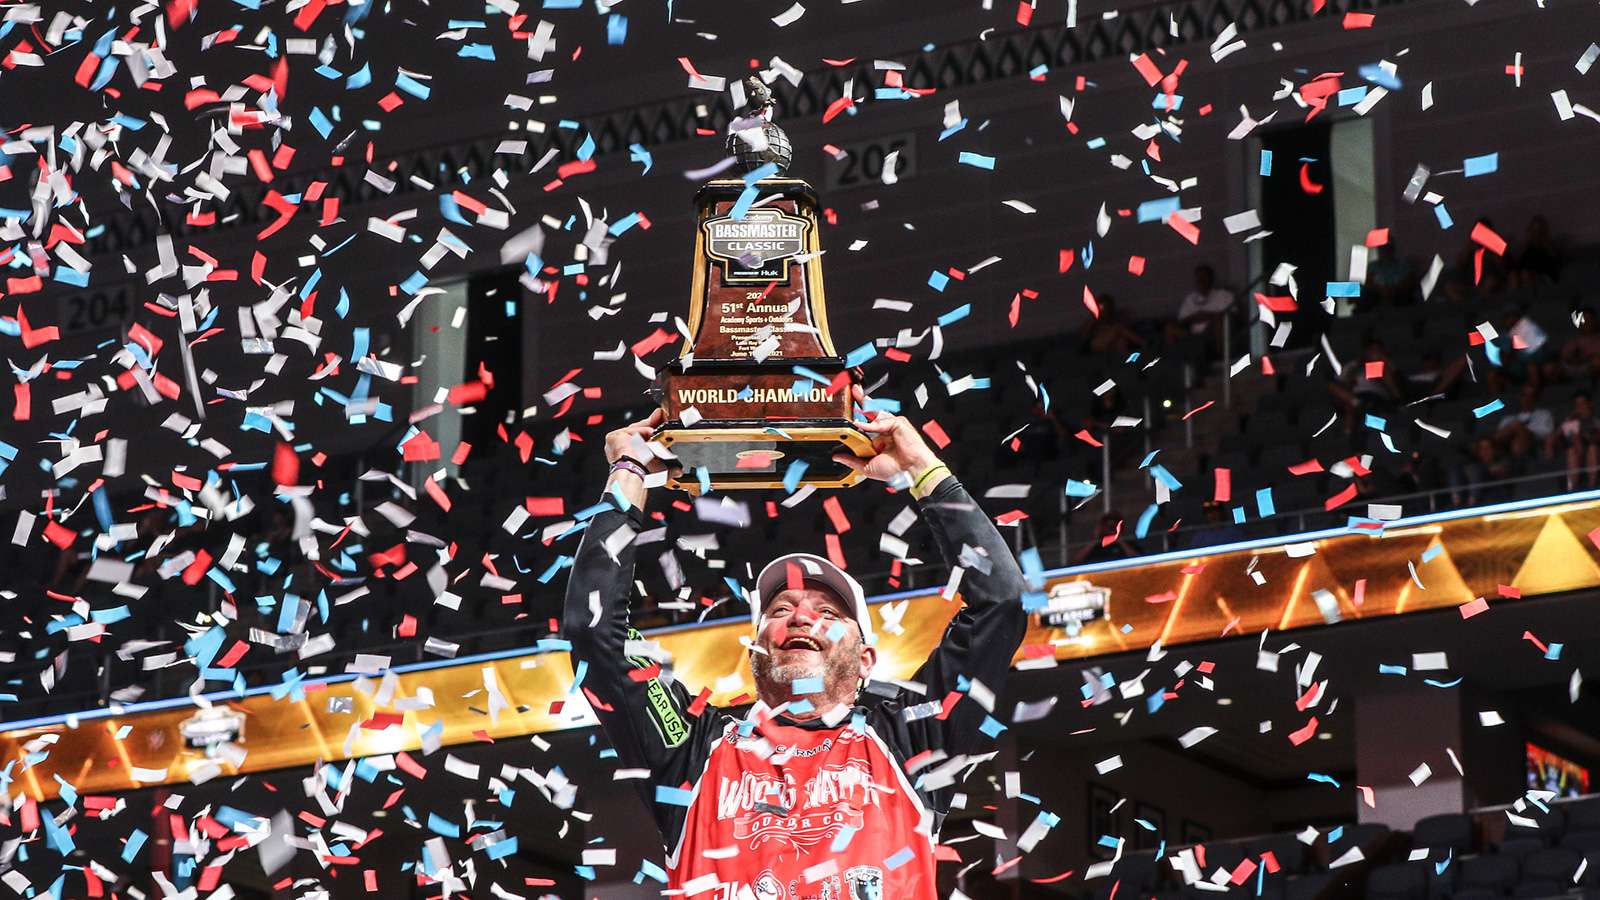 Hank Cherry clinches his second Bassmaster Classic champion title.